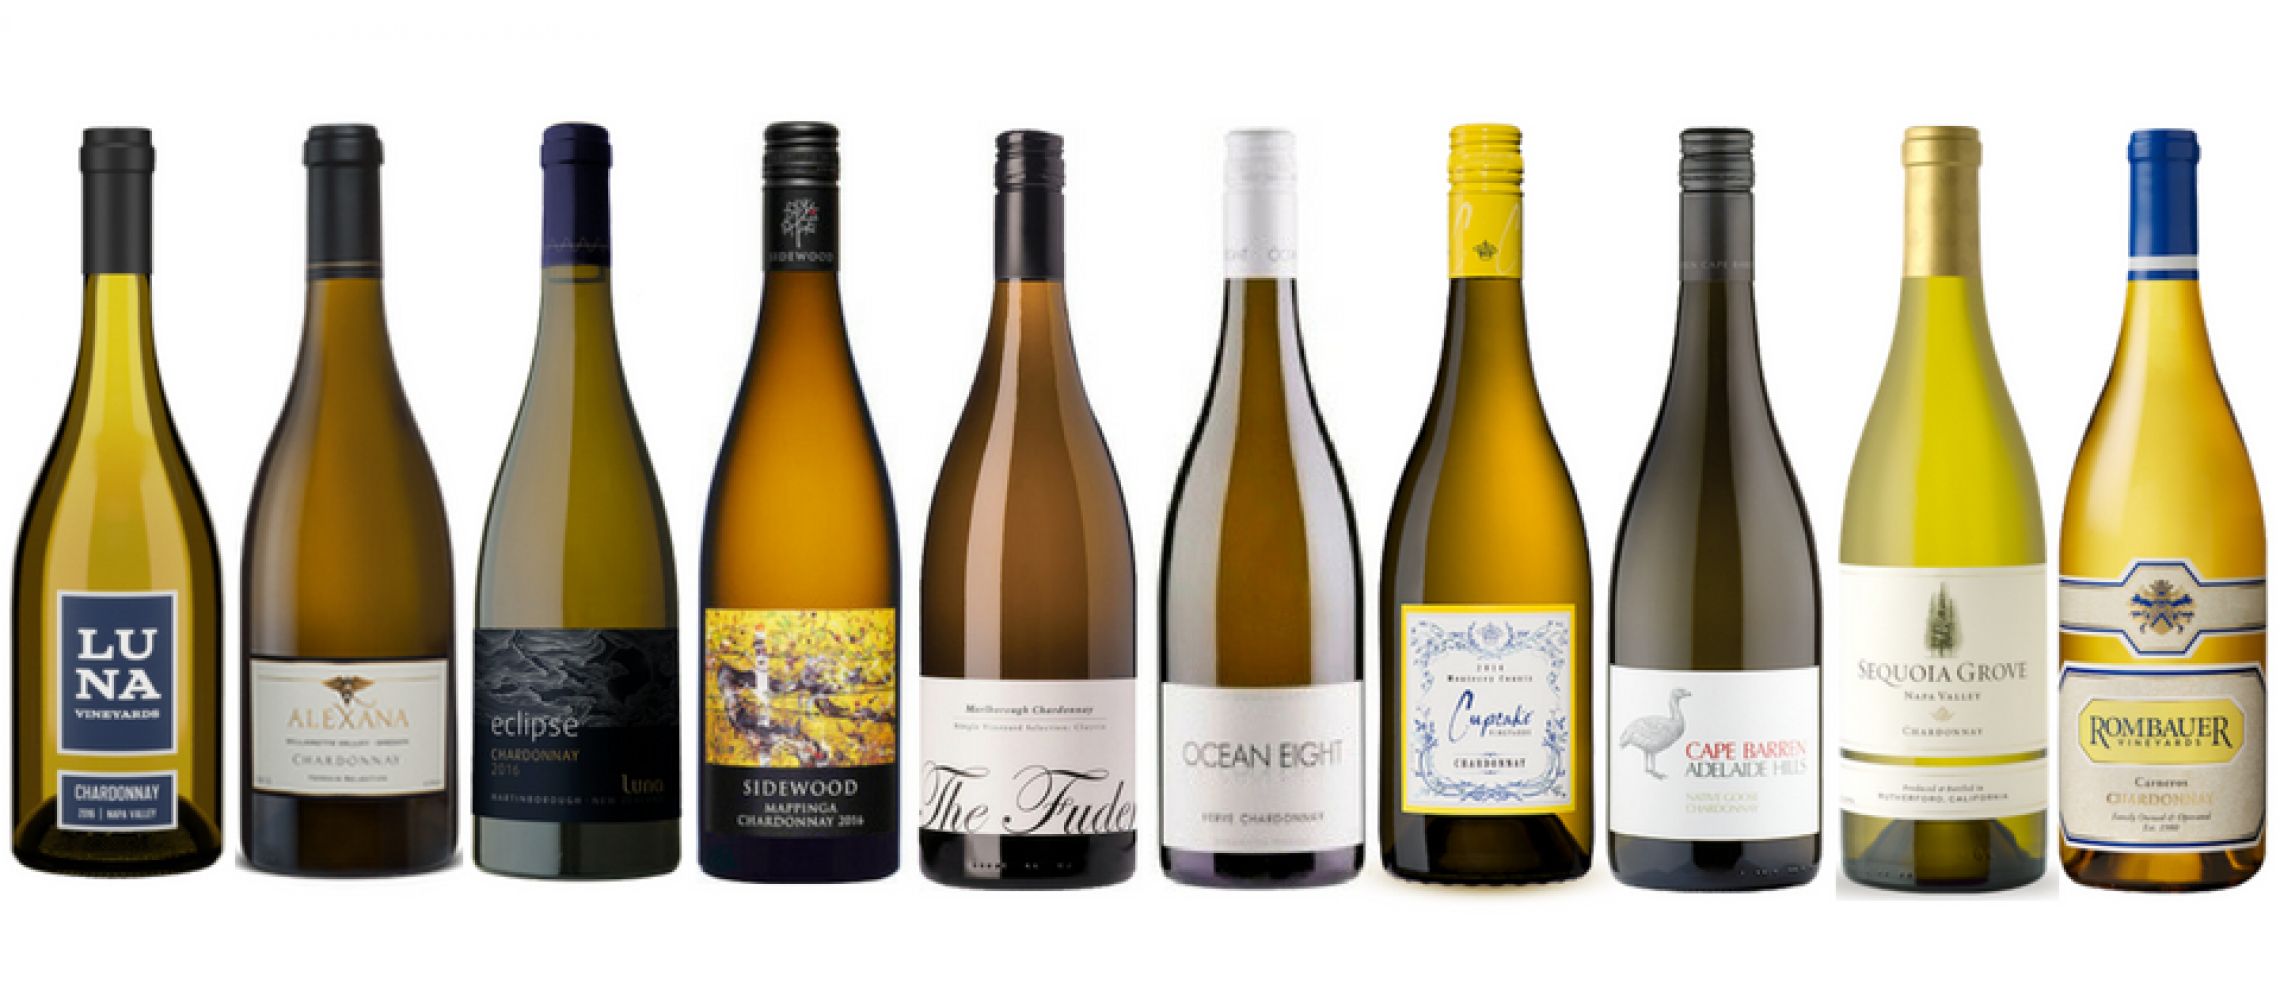 Photo for: Best Chardonnay Wines to Pair with Shrimp and Pasta